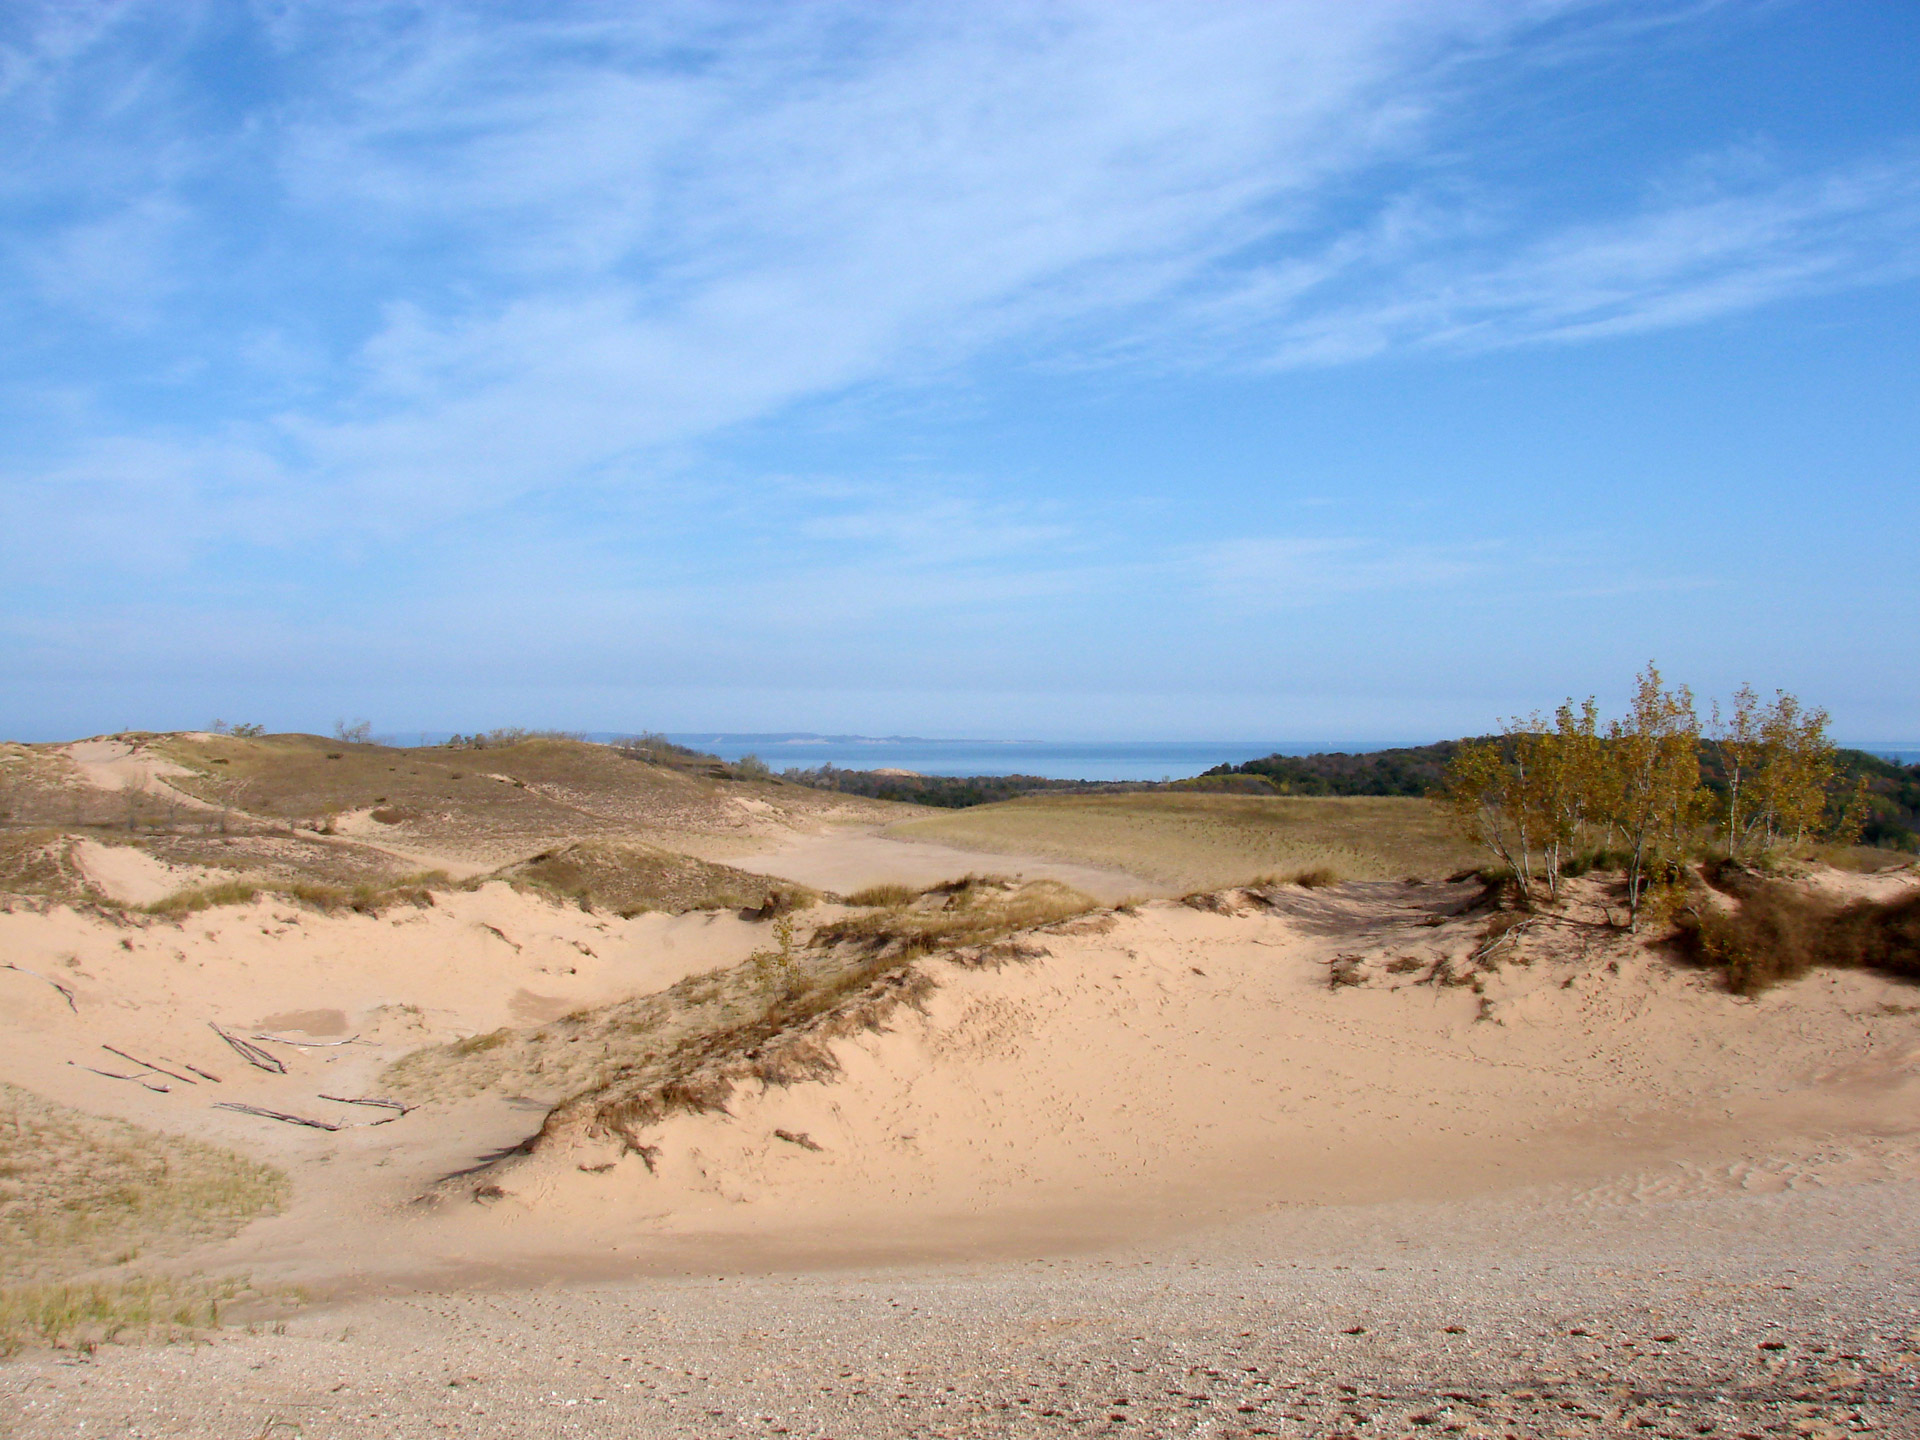 This photo shows the beautiful skies and sand near the Michigan shoreline.